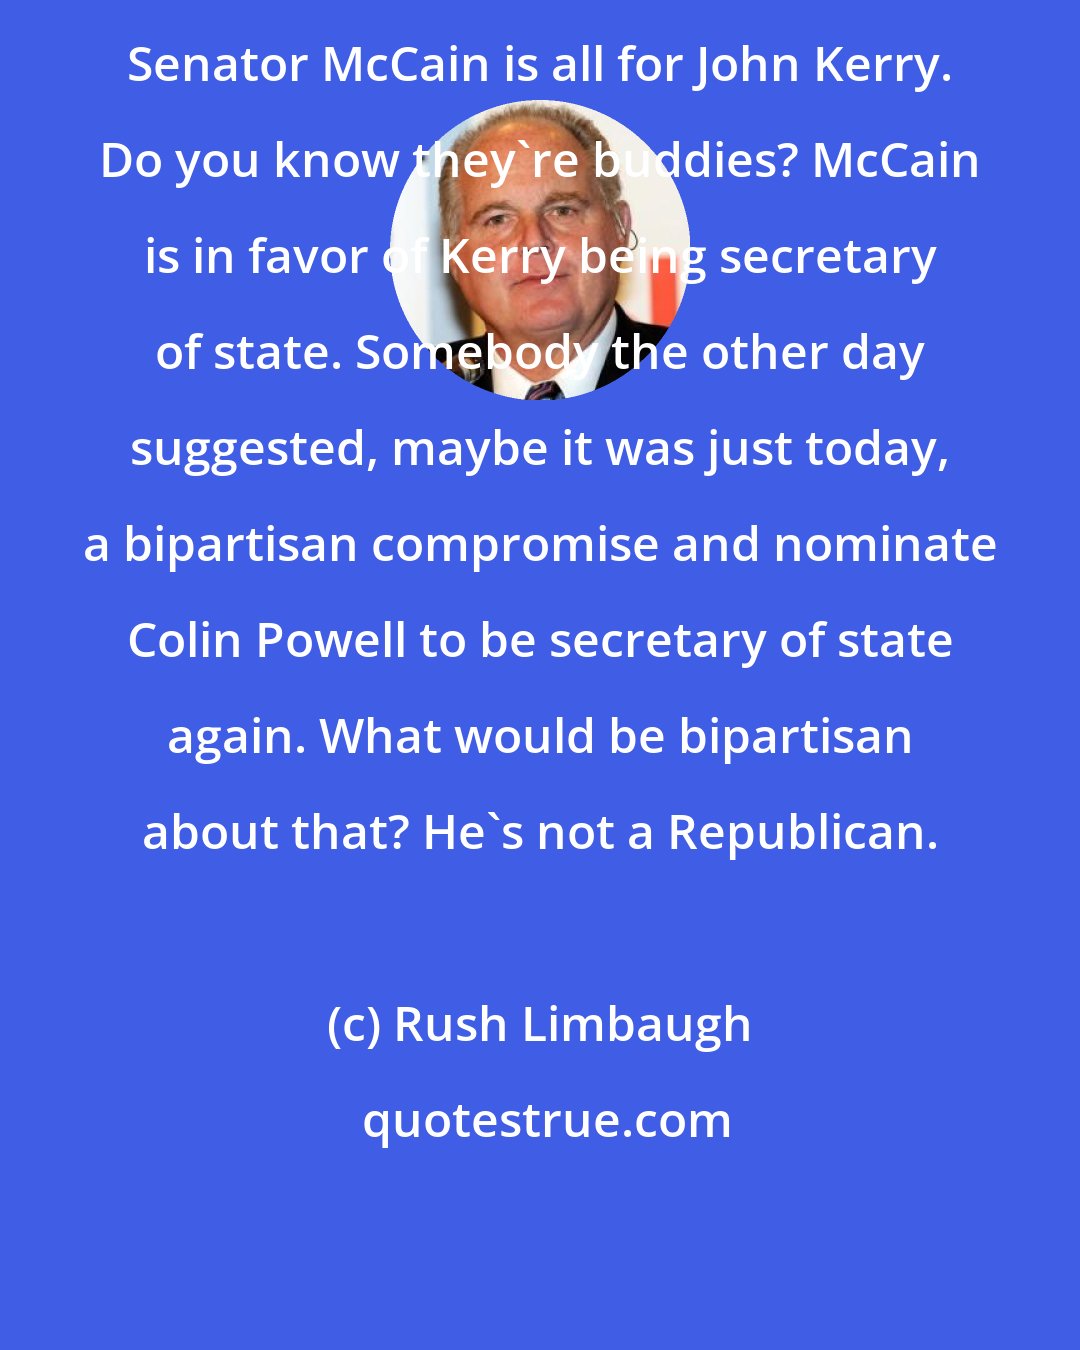 Rush Limbaugh: Senator McCain is all for John Kerry. Do you know they're buddies? McCain is in favor of Kerry being secretary of state. Somebody the other day suggested, maybe it was just today, a bipartisan compromise and nominate Colin Powell to be secretary of state again. What would be bipartisan about that? He's not a Republican.